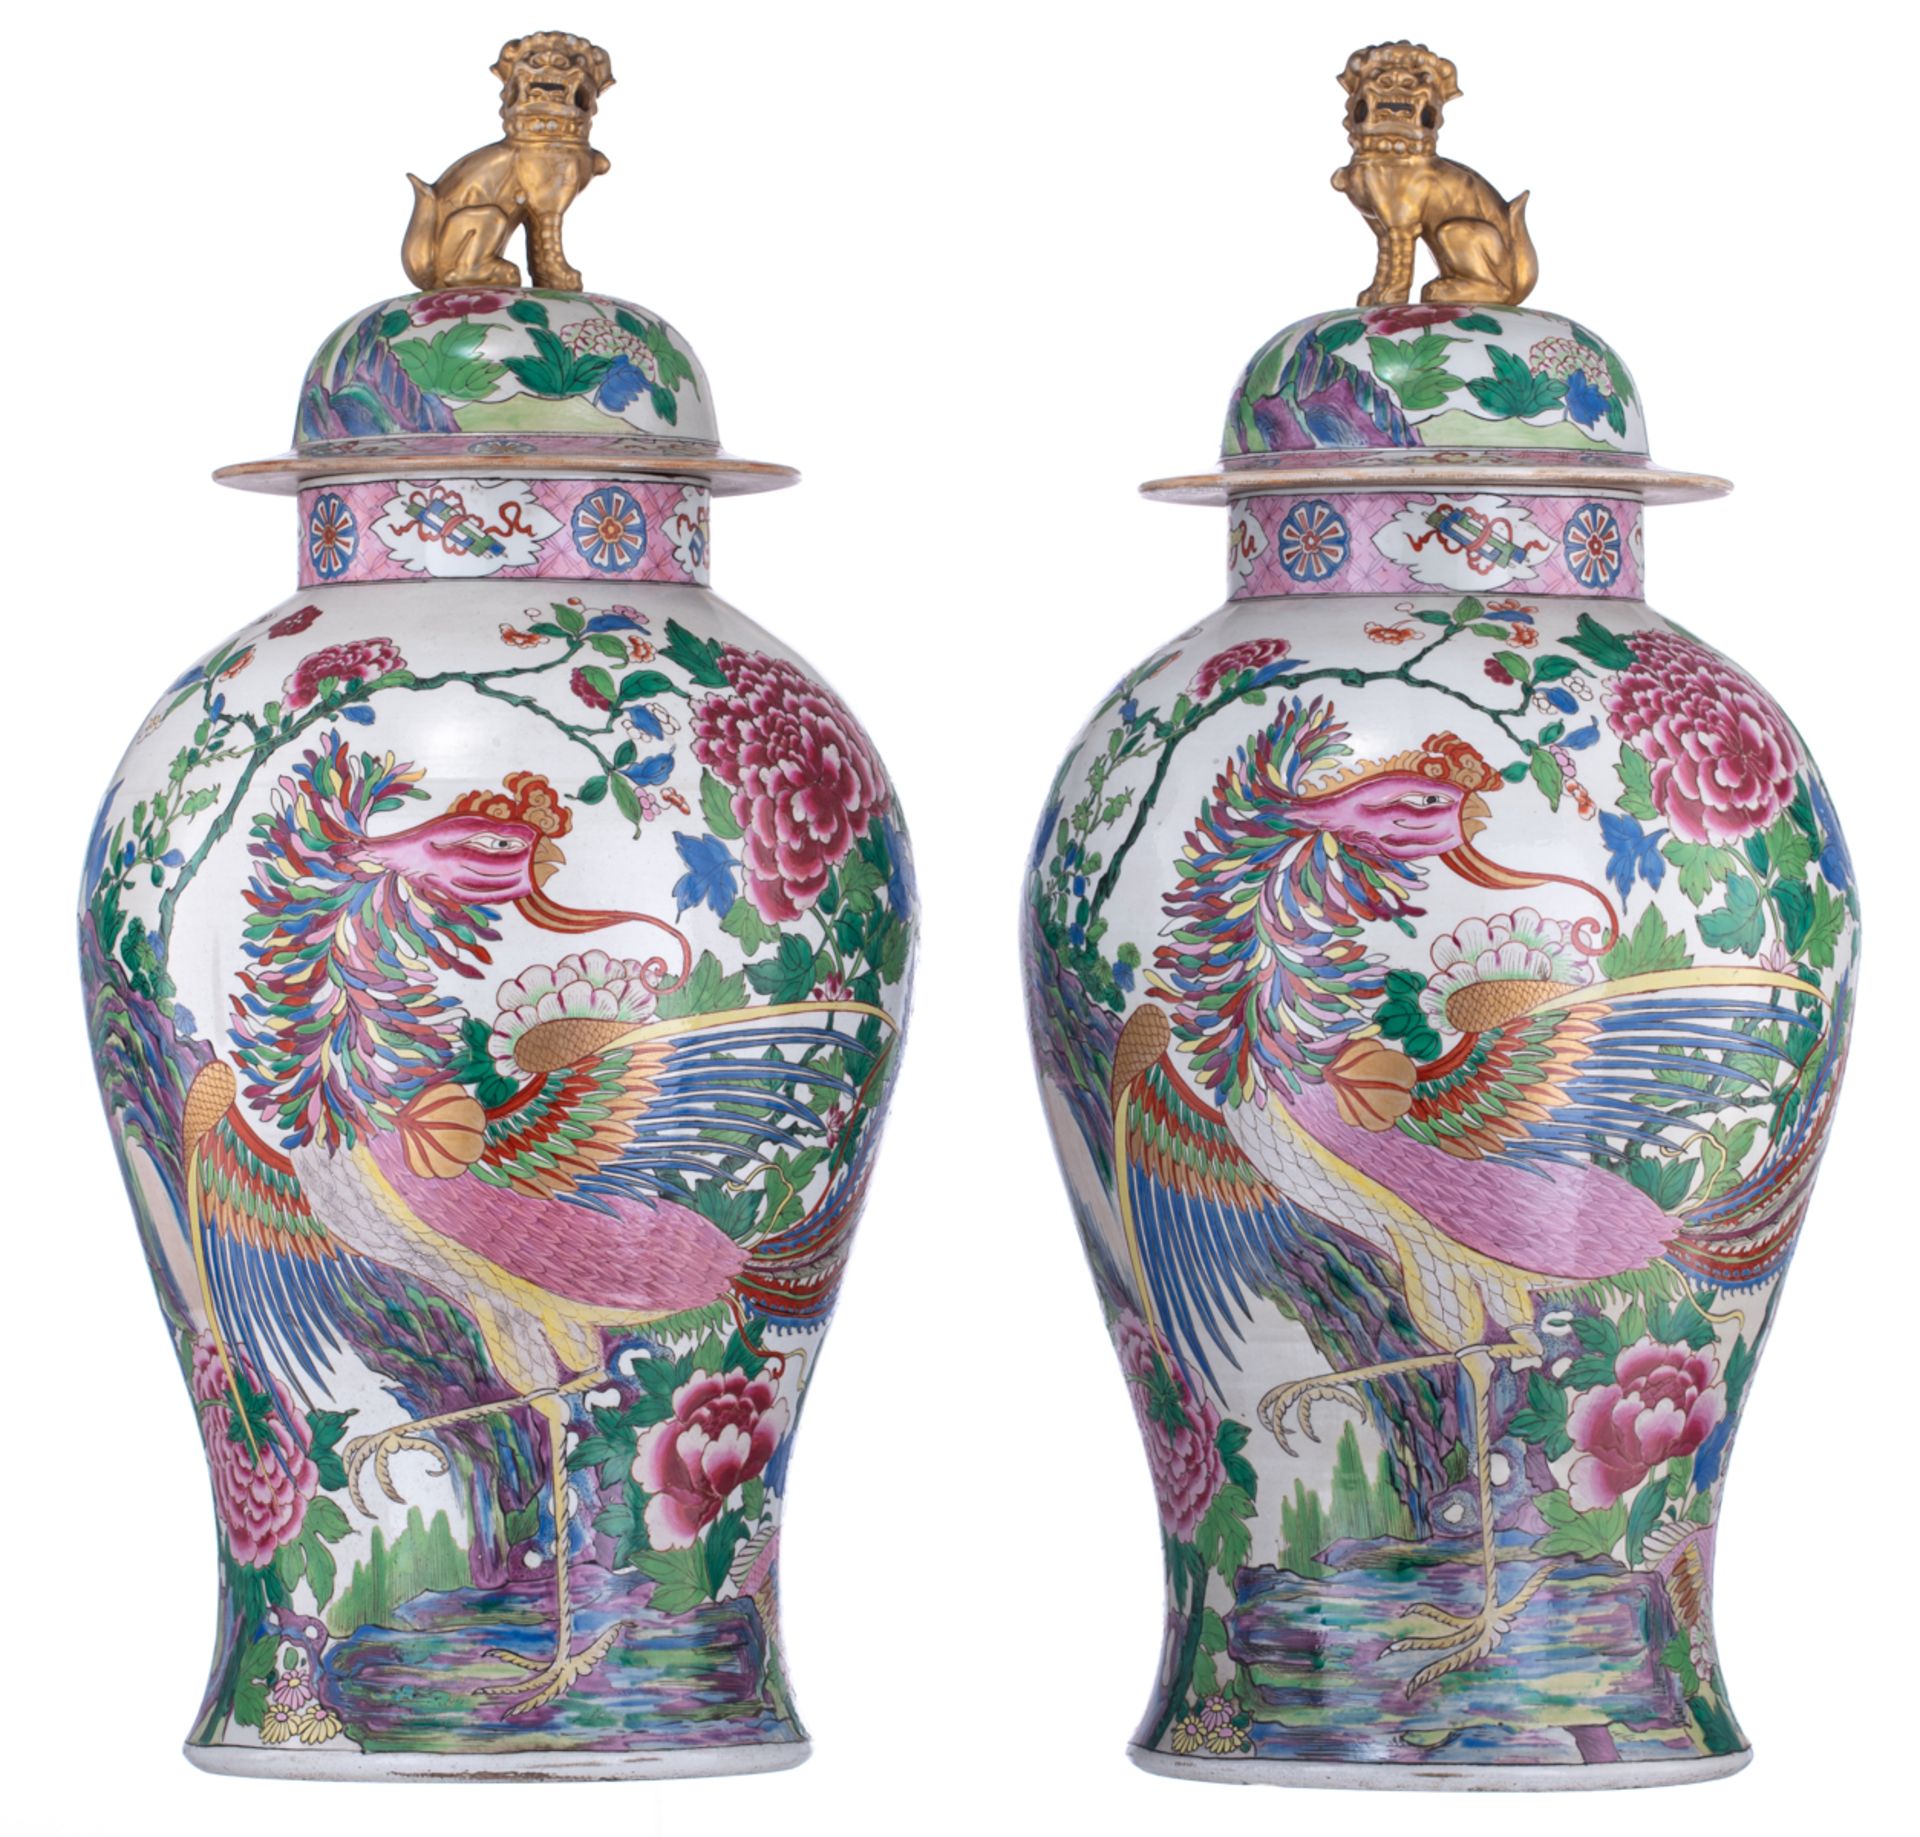 A large pair of covered famille rose Samson vases, decorated with birds and griffons in a floral set